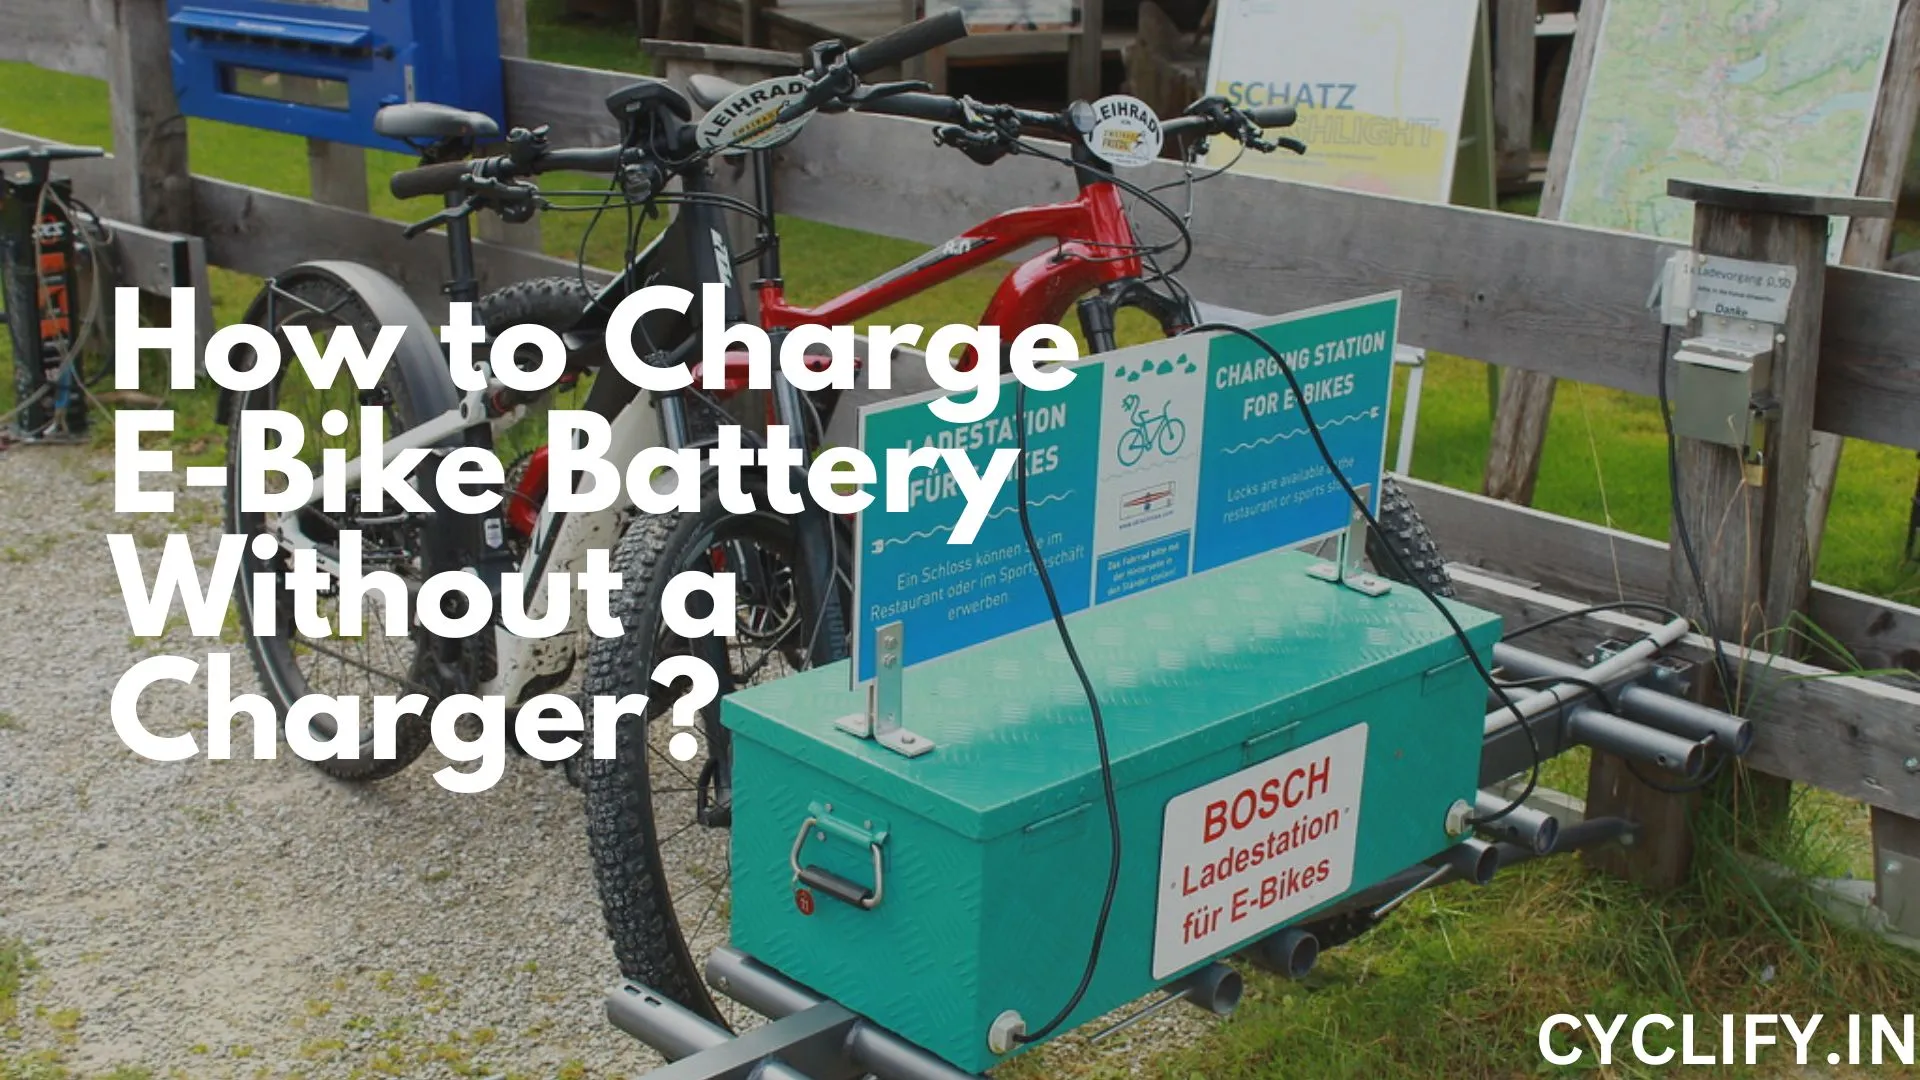 ow to Charge E-Bike Battery Without a Charger- Two E-bikes charging at a Charging Station